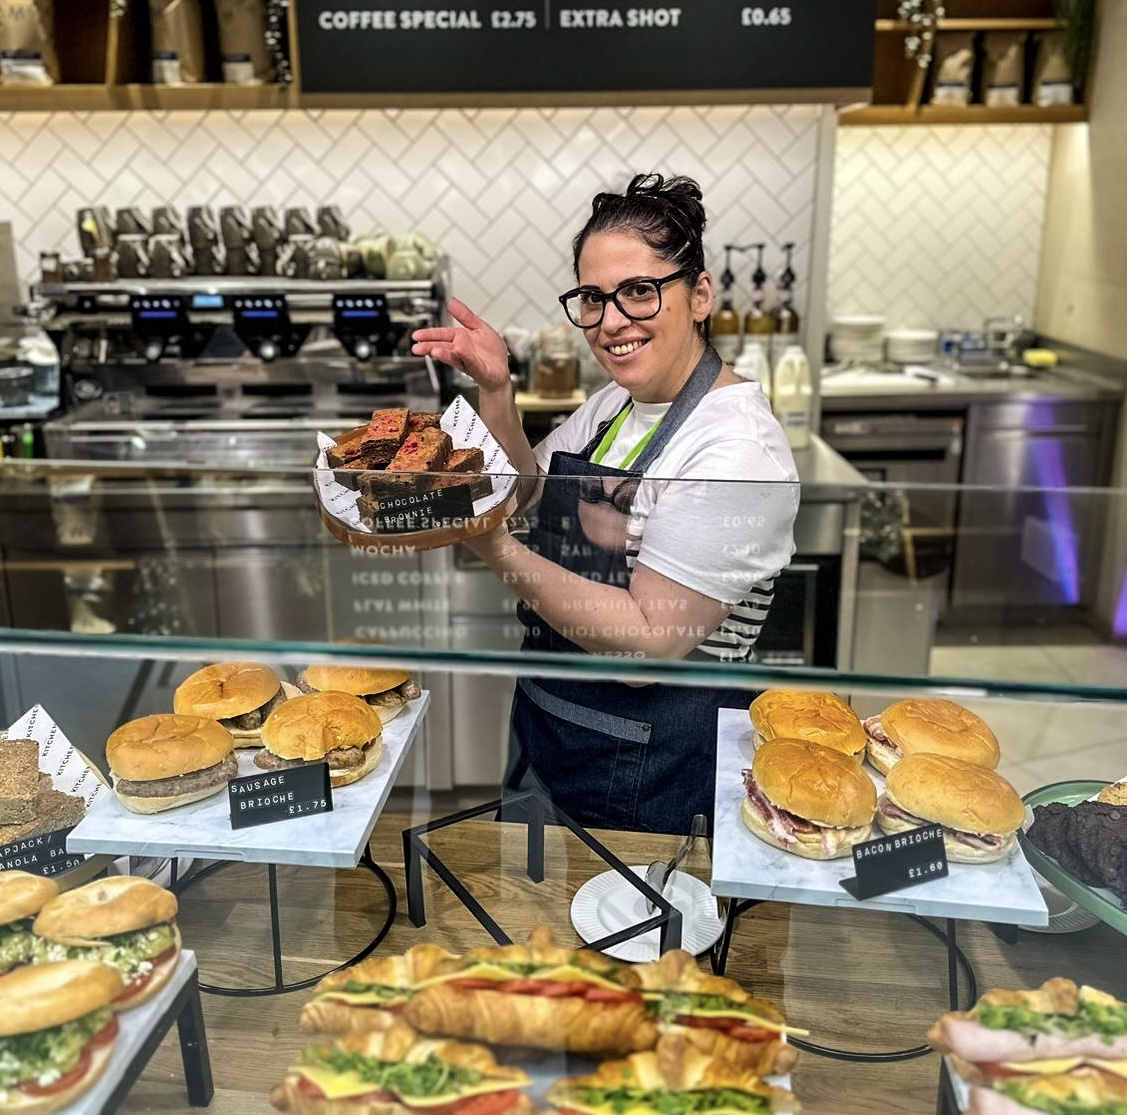 The wonderful Lydia setting up our breakfast spread on one of our coffee bars this morning 🤩 #eatwell #havefun #promisesdelivered